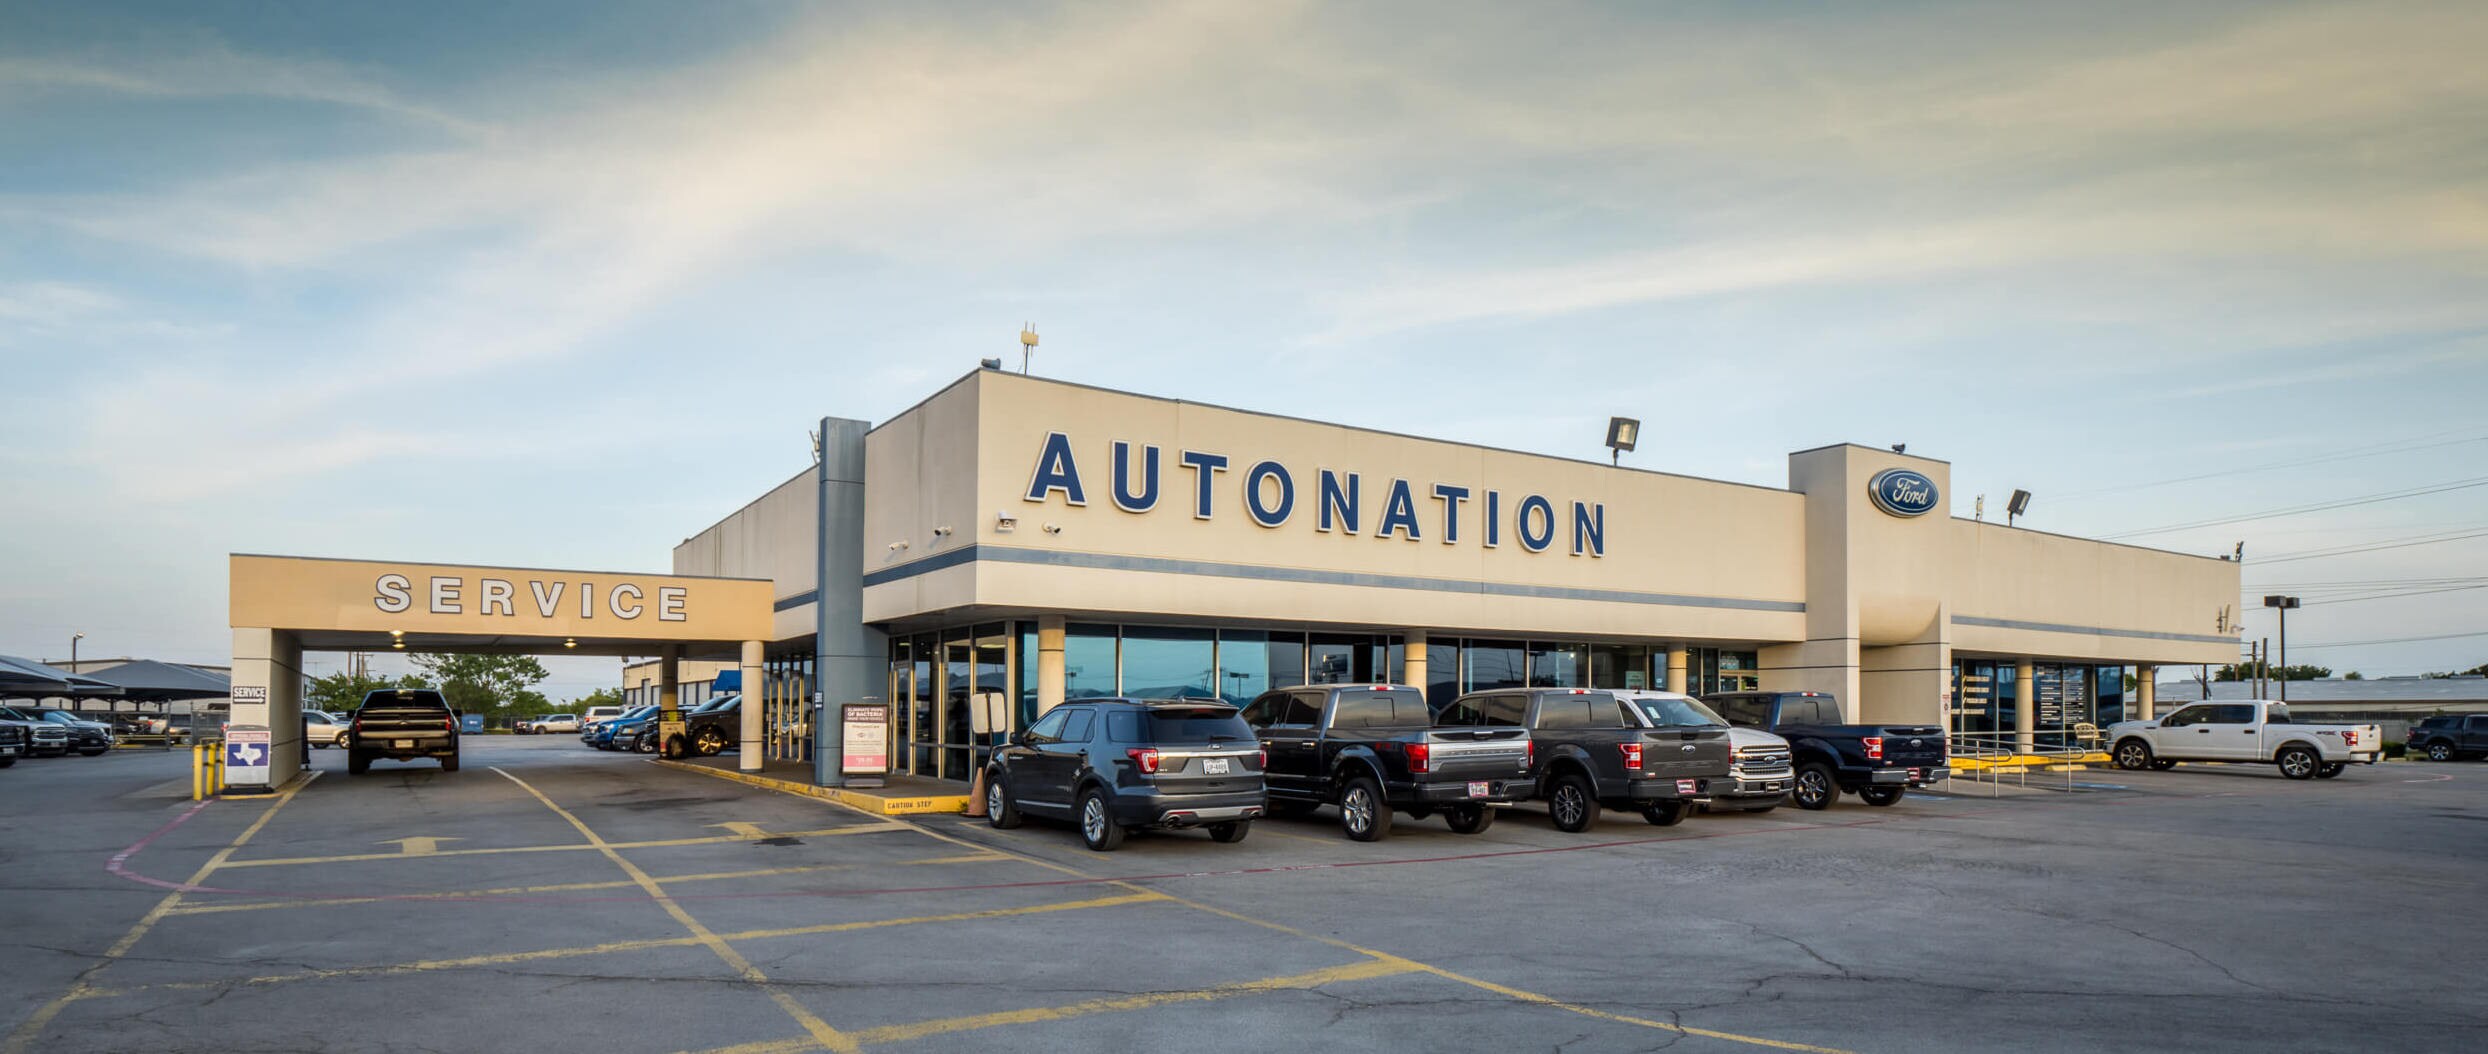 AutoNation Ford Burleson exterior with cars parked in front of building